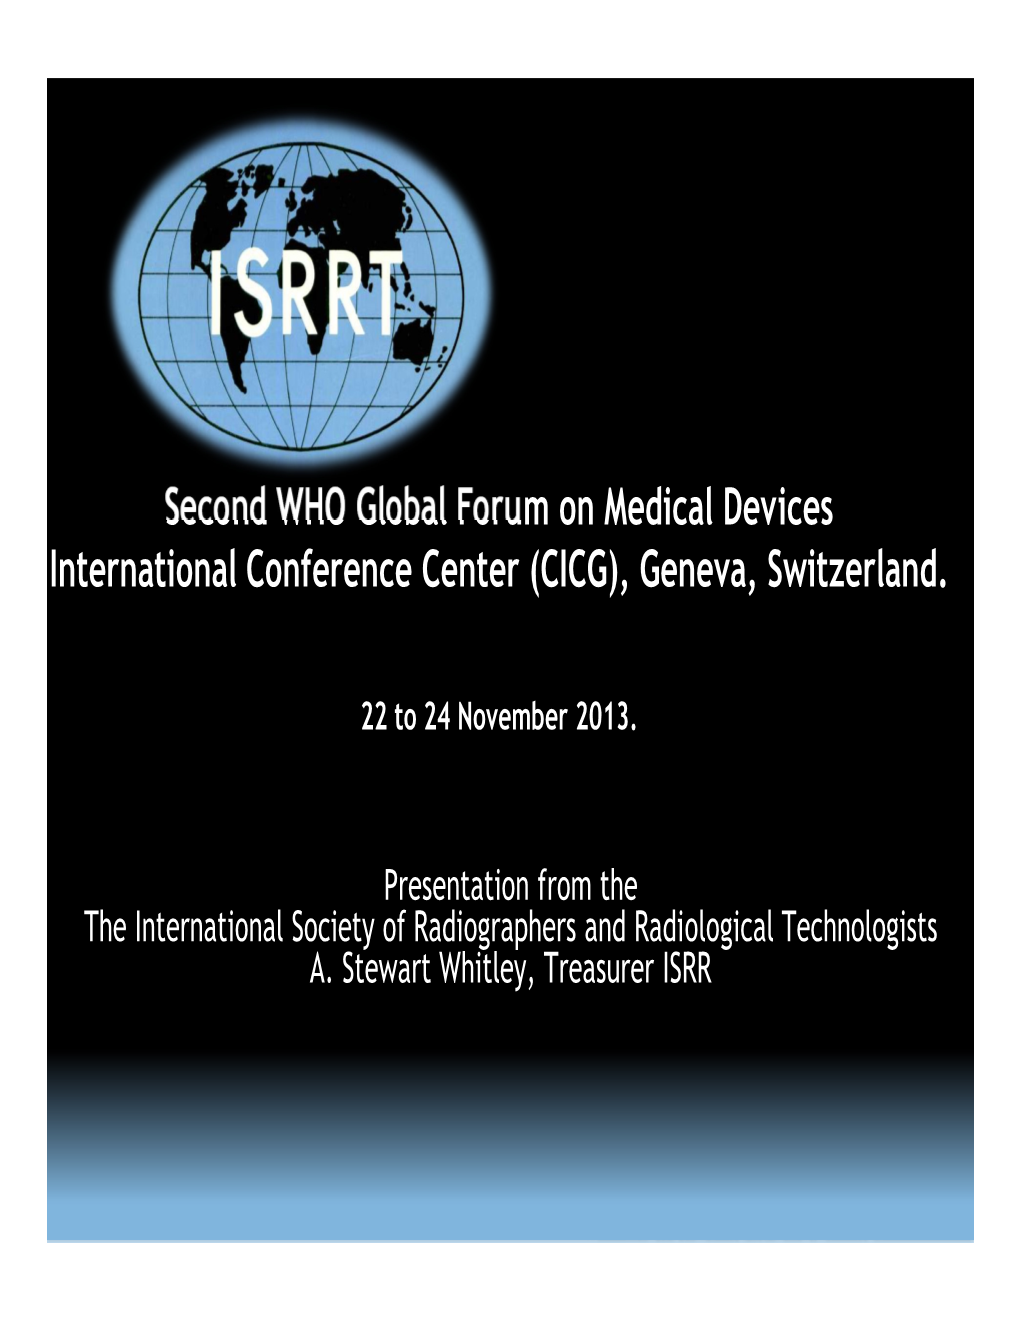 Second WHO Global Forum on Medical Devices International Conference Center (CICG), Geneva, Switzerland